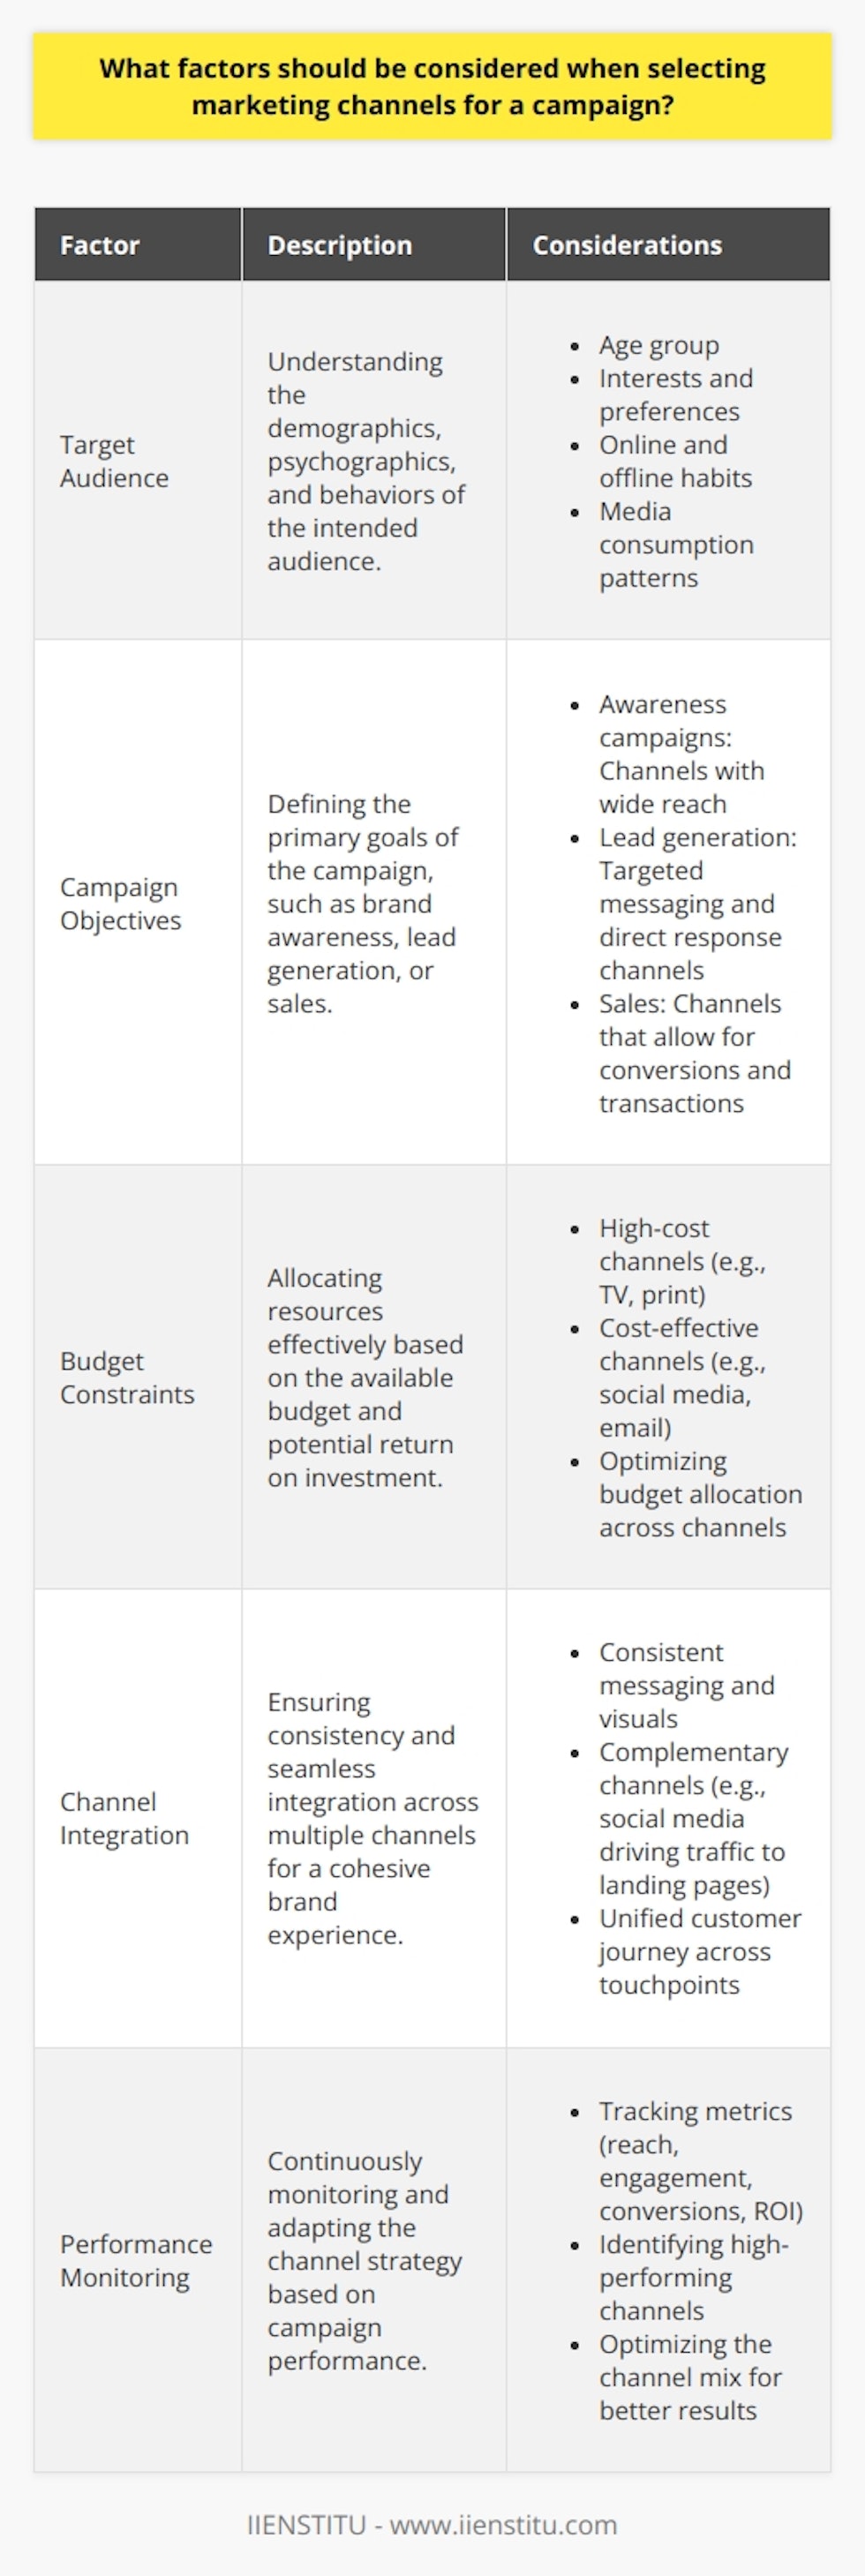 Selecting marketing channels for a campaign requires careful consideration of several key factors. Marketers must evaluate the target audience, budget constraints, and desired outcomes to make informed decisions. The chosen channels should align with the preferences and behaviors of the intended audience. For instance, younger demographics may be more responsive to social media campaigns, while older generations might prefer traditional media. Budget limitations also play a crucial role in channel selection, as some channels may be more cost-effective than others. The marketing team should assess the potential return on investment for each channel. Additionally, the campaigns objectives, such as brand awareness, lead generation, or sales, will influence the choice of channels. Understanding the Target Audience To select the most effective marketing channels, marketers must have a deep understanding of their target audience. Conducting market research and analyzing customer data can provide valuable insights into the audiences demographics, psychographics, and behavioral patterns. This information helps identify the channels that the target audience frequently uses and engages with. For example, if the campaign targets tech-savvy millennials, digital channels like social media, email marketing, and mobile advertising may be more appropriate. On the other hand, if the audience consists of senior citizens, traditional channels such as print media, radio, and television might be more effective. Aligning Channels with Campaign Objectives The marketing team should clearly define the campaigns objectives before selecting the channels. Different objectives may require different approaches and channels. For instance, if the primary goal is to increase brand awareness, channels with a wide reach, such as television, radio, and social media, may be suitable. If the objective is to generate leads or drive sales, channels that allow for targeted messaging and direct response, such as email marketing, search engine marketing, and content marketing, may be more effective. Aligning the chosen channels with the campaigns objectives ensures that the marketing efforts are focused and more likely to yield the desired results. Considering Budget Constraints Budget constraints are a significant factor in selecting marketing channels. Some channels, such as television advertising, can be expensive, while others, like social media marketing, may be more cost-effective. Marketers should allocate the available budget wisely, considering the potential return on investment for each channel. It may be beneficial to use a mix of channels to maximize reach and impact while staying within budget limits. Testing and monitoring the performance of each channel can help optimize the budget allocation over time. Evaluating Channel Integration and Consistency When selecting multiple channels for a campaign, it is crucial to ensure that they integrate seamlessly and deliver a consistent message. A cohesive campaign across different channels reinforces the brands message and enhances the overall impact. Marketers should consider how the chosen channels can complement each other and create a unified experience for the audience. For example, a social media campaign can drive traffic to a landing page, which can then encourage email sign-ups or purchases. Consistency in messaging, visuals, and tone across all channels helps build brand recognition and trust. Monitoring and Adapting Marketing channel selection is not a one-time decision. Marketers should continuously monitor the performance of the selected channels and adapt the strategy as needed. Regular analysis of metrics such as reach, engagement, conversion rates, and return on investment helps identify the channels that are delivering the best results. Based on these insights, marketers can make data-driven decisions to optimize the channel mix, allocate resources more effectively, and improve the overall campaign performance. In conclusion, selecting marketing channels for a campaign involves careful consideration of the target audience, campaign objectives, budget constraints, channel integration, and ongoing monitoring. By understanding the audience, aligning channels with objectives, allocating resources wisely, ensuring consistency, and adapting based on performance, marketers can create effective campaigns that deliver the desired results.